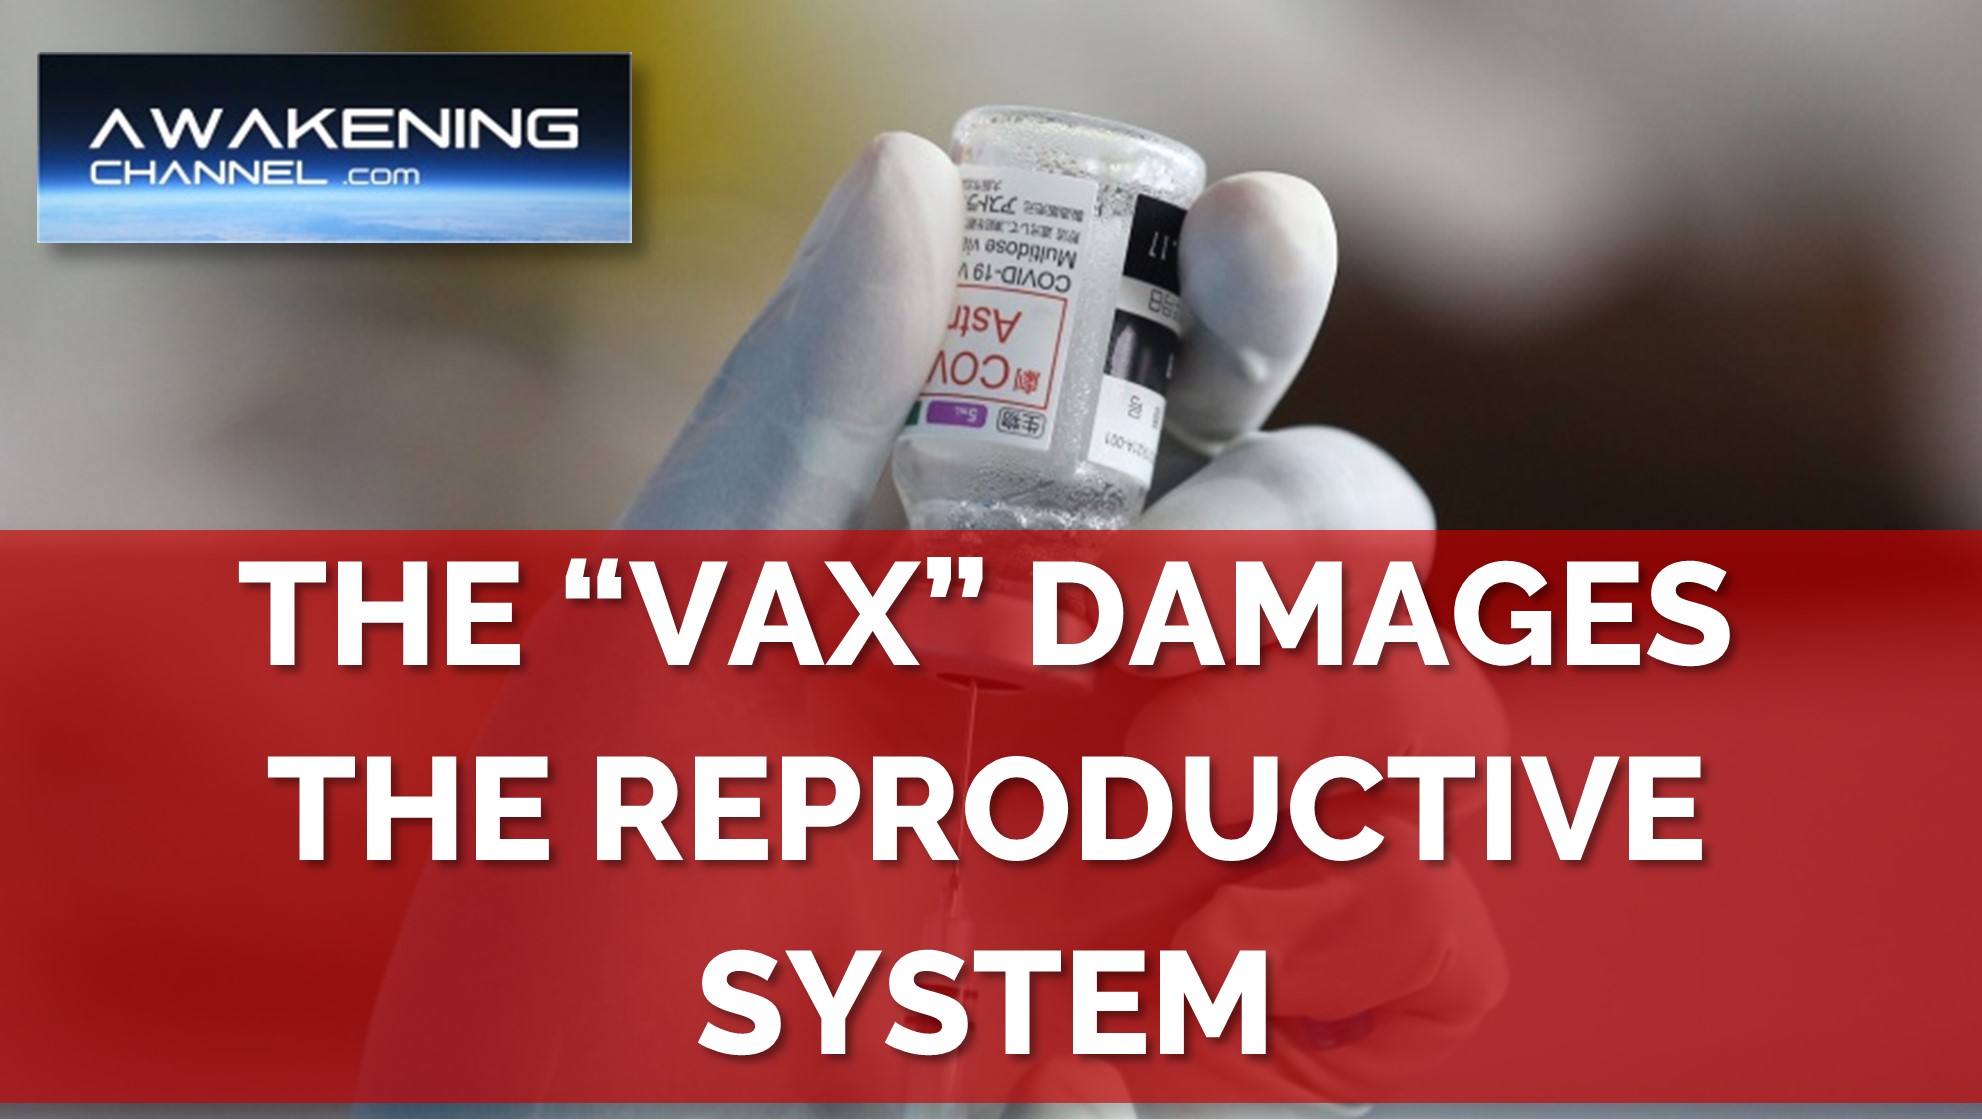 THE “VAX” DAMAGES THE REPRODUCTIVE SYSTEM